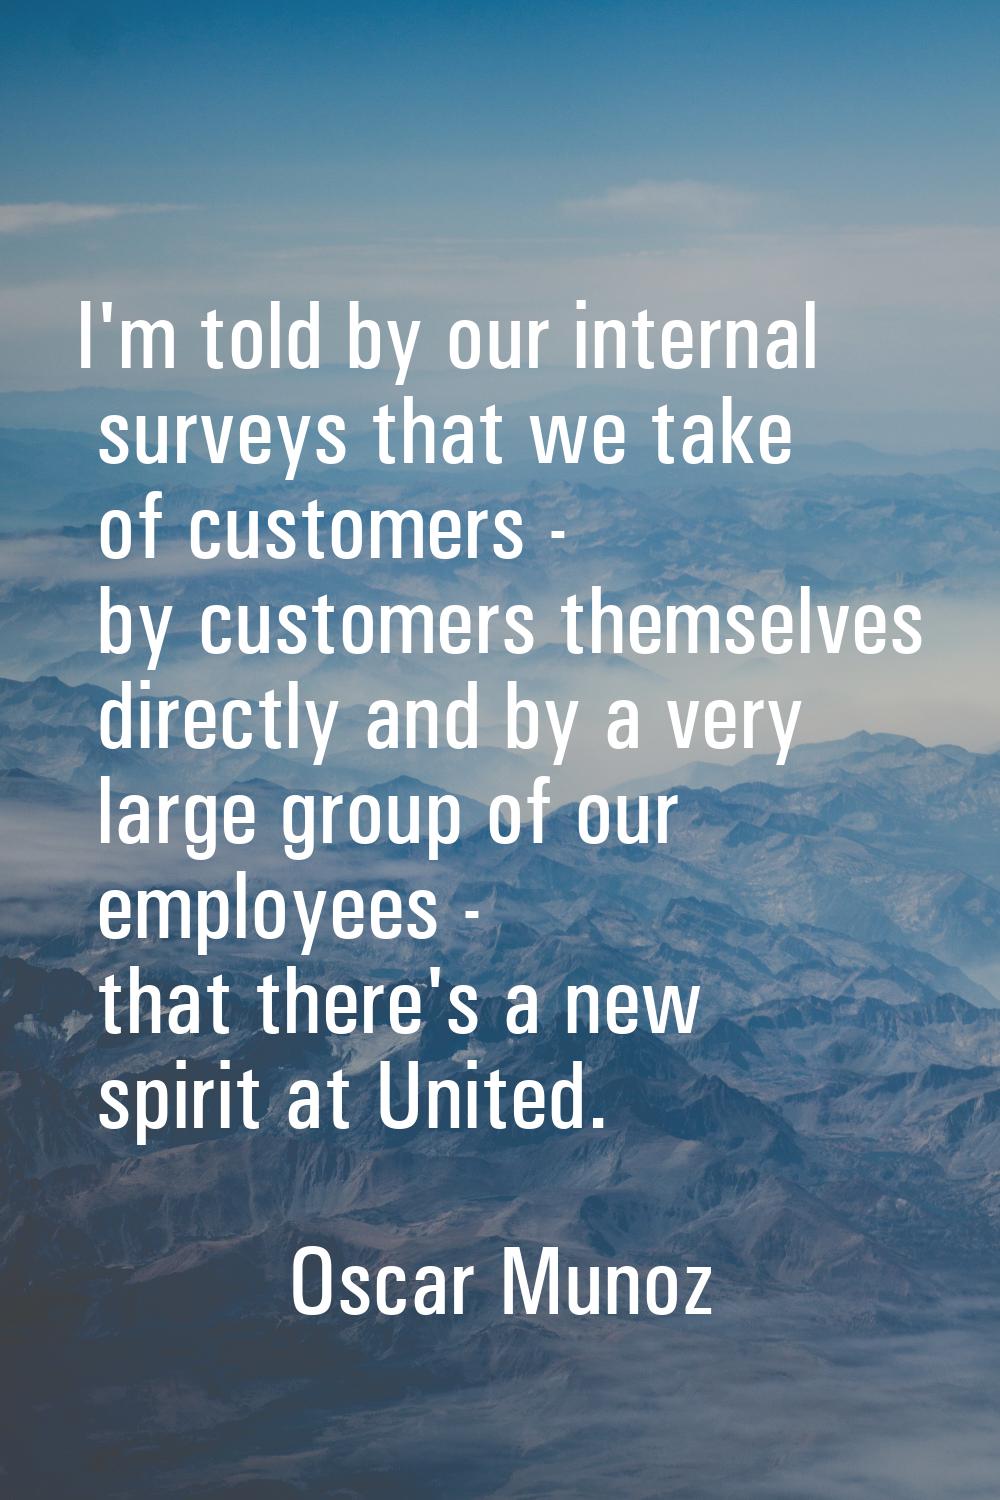 I'm told by our internal surveys that we take of customers - by customers themselves directly and b